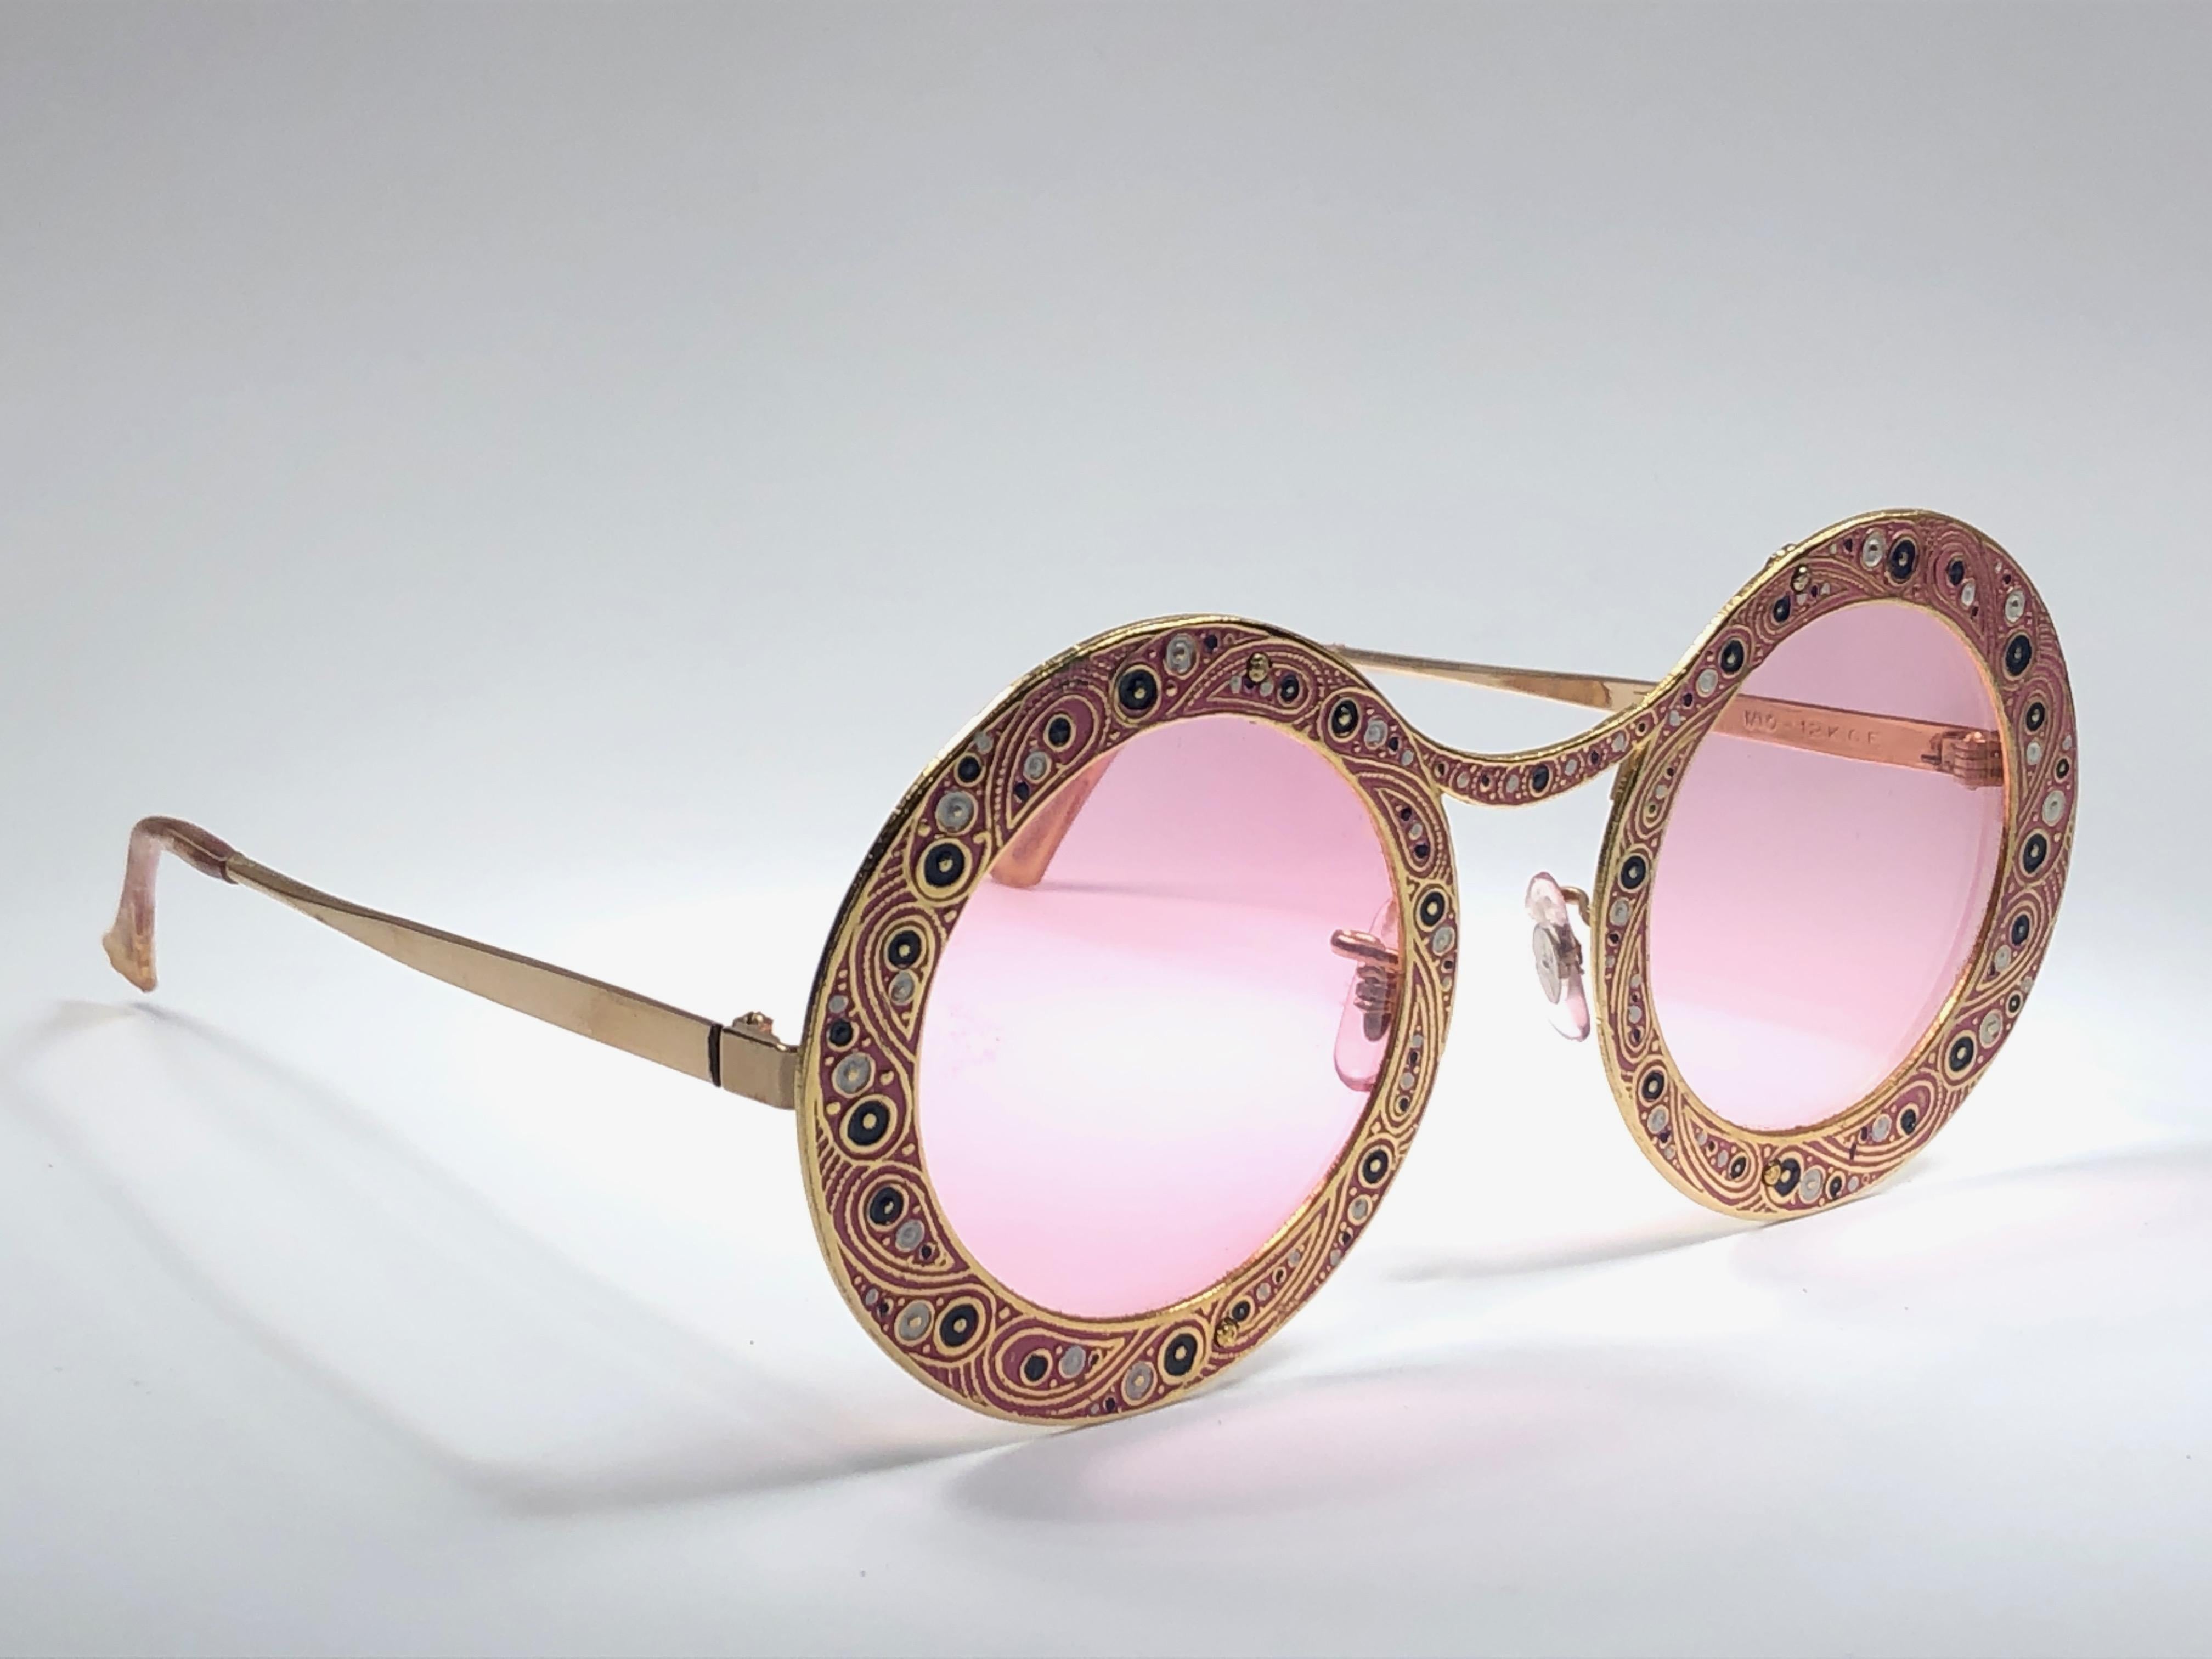 Ultra rare pair of Christian Dior Sunglasses circa 1969.

This is a seldom and rare piece not only for its aesthetic value but for its importance in the sunglasses and fashion history. 

Delicate enamel ornamented plated frame.

Please noticed this